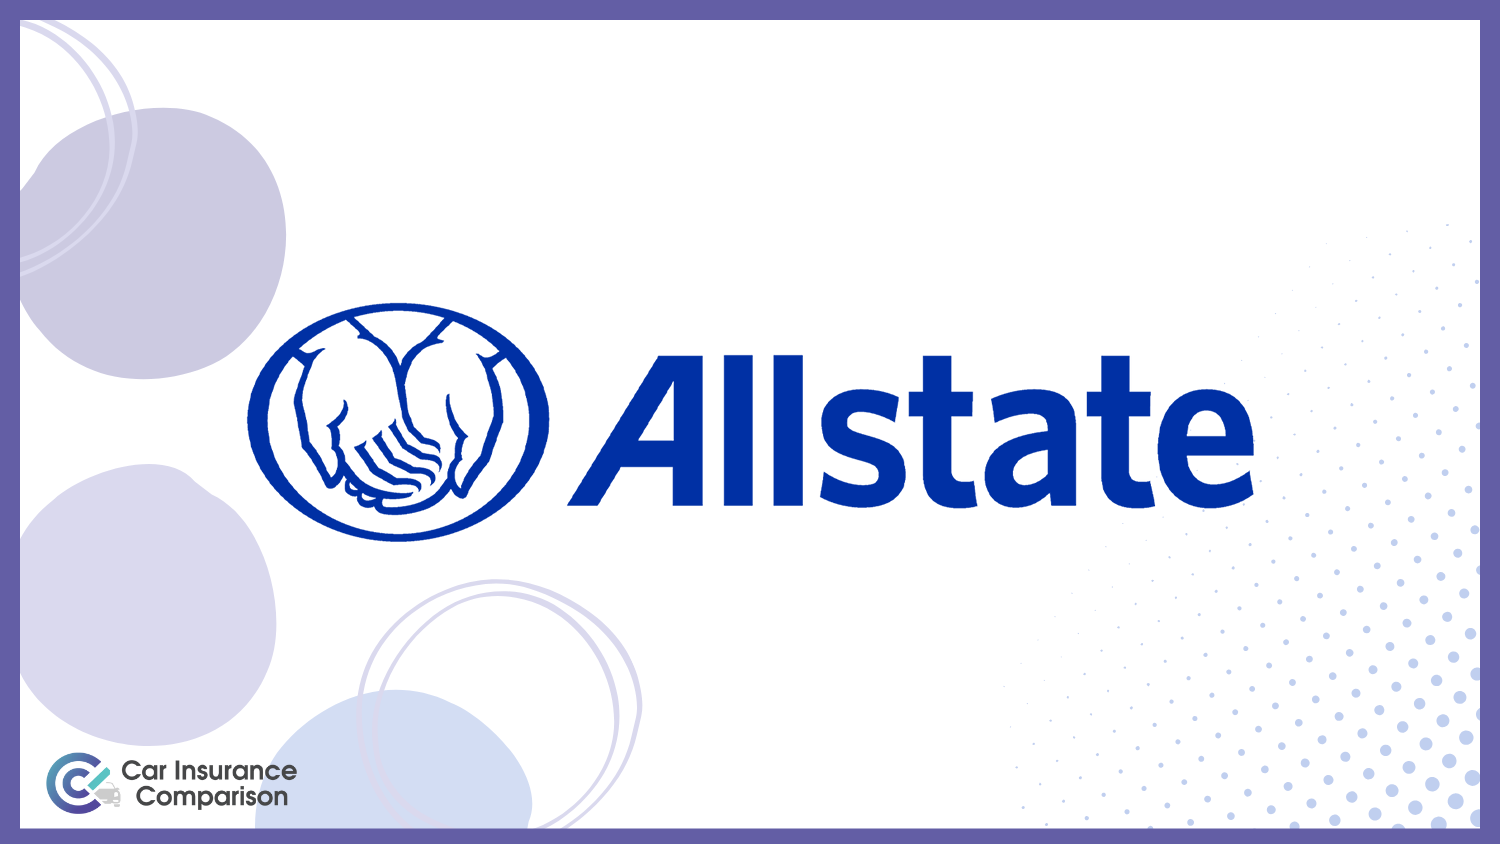 Allstate: Compare Best Car Insurance Companies That Only Look Back Three Years